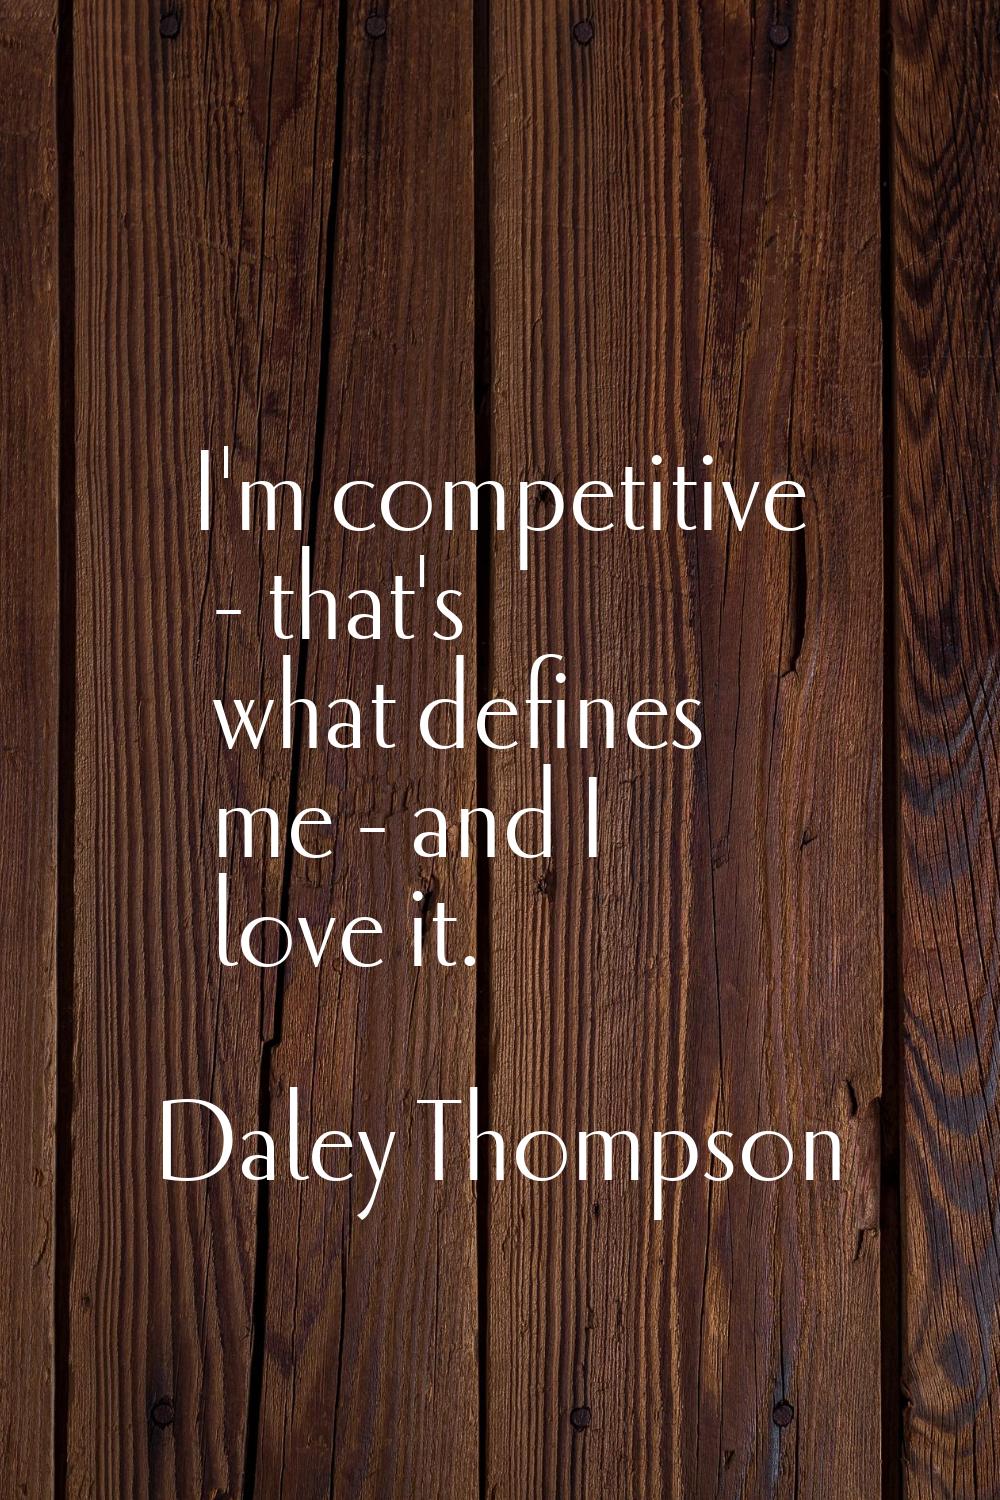 I'm competitive - that's what defines me - and I love it.